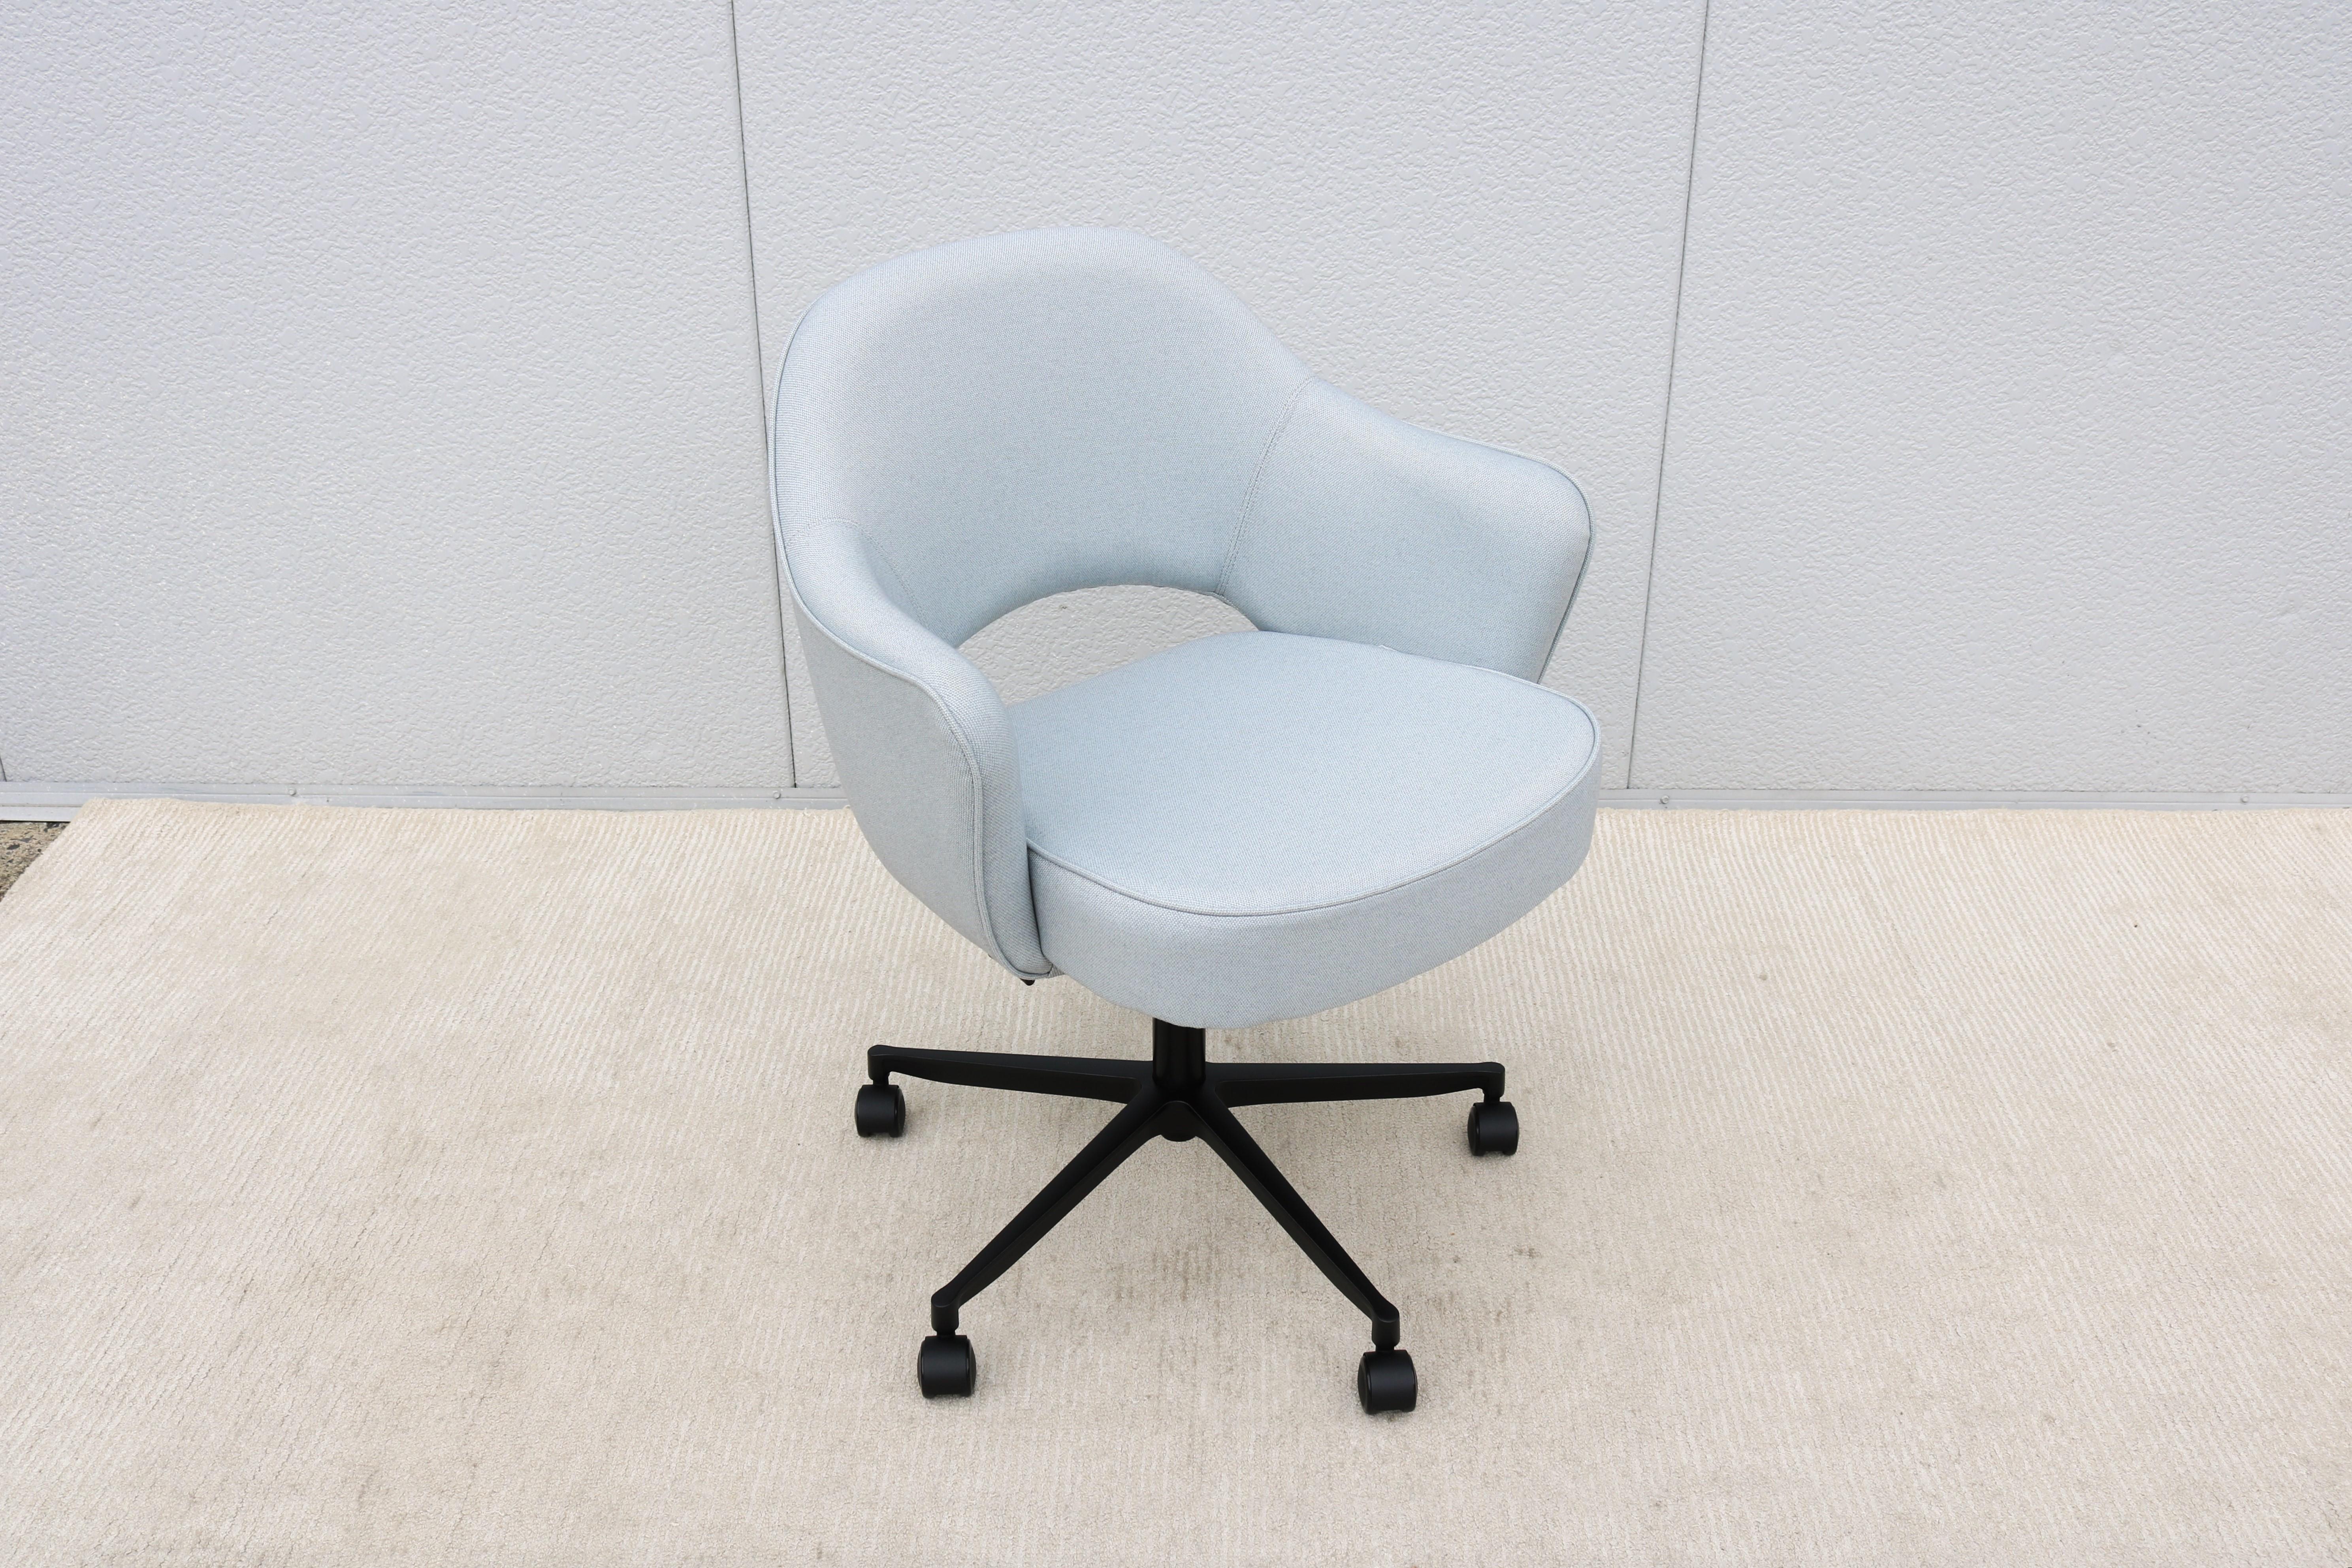 Stunning authentic mid-century modern Saarinen executive arm chair features a height-adjustable swivel base with weight-adjusted tilt.
One of Knoll's most popular designs that achieved supreme comfort through the shape of its shell.
Was introduced